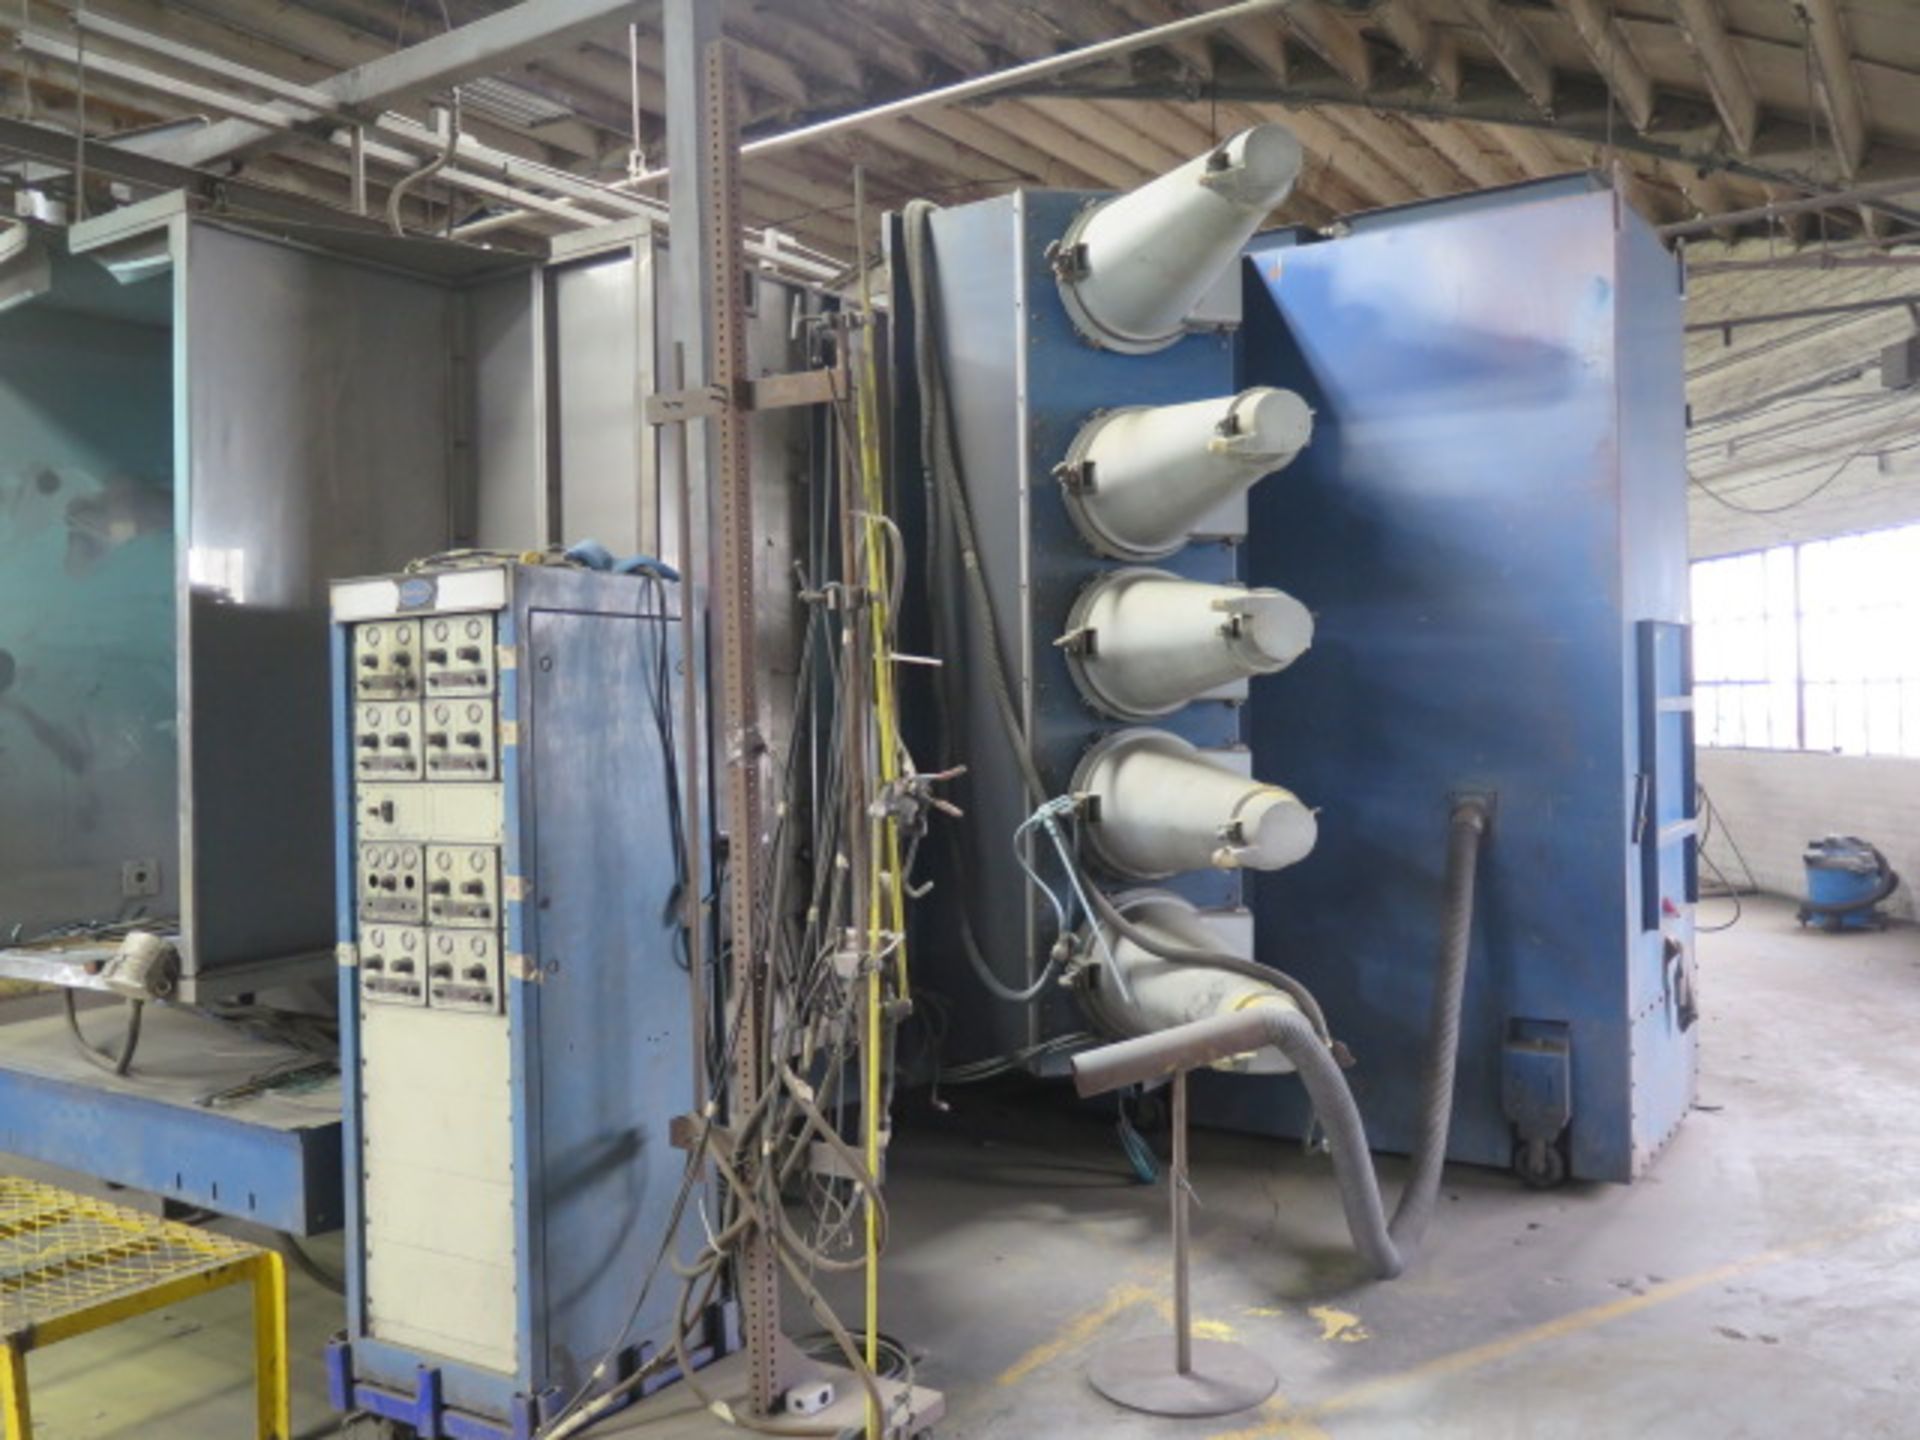 Nordson CK-05 Powder Coating System w/ 20’W x 25’L x 9’6”H Booth, (14) 13” Dia x 36”L Primary - Image 4 of 16